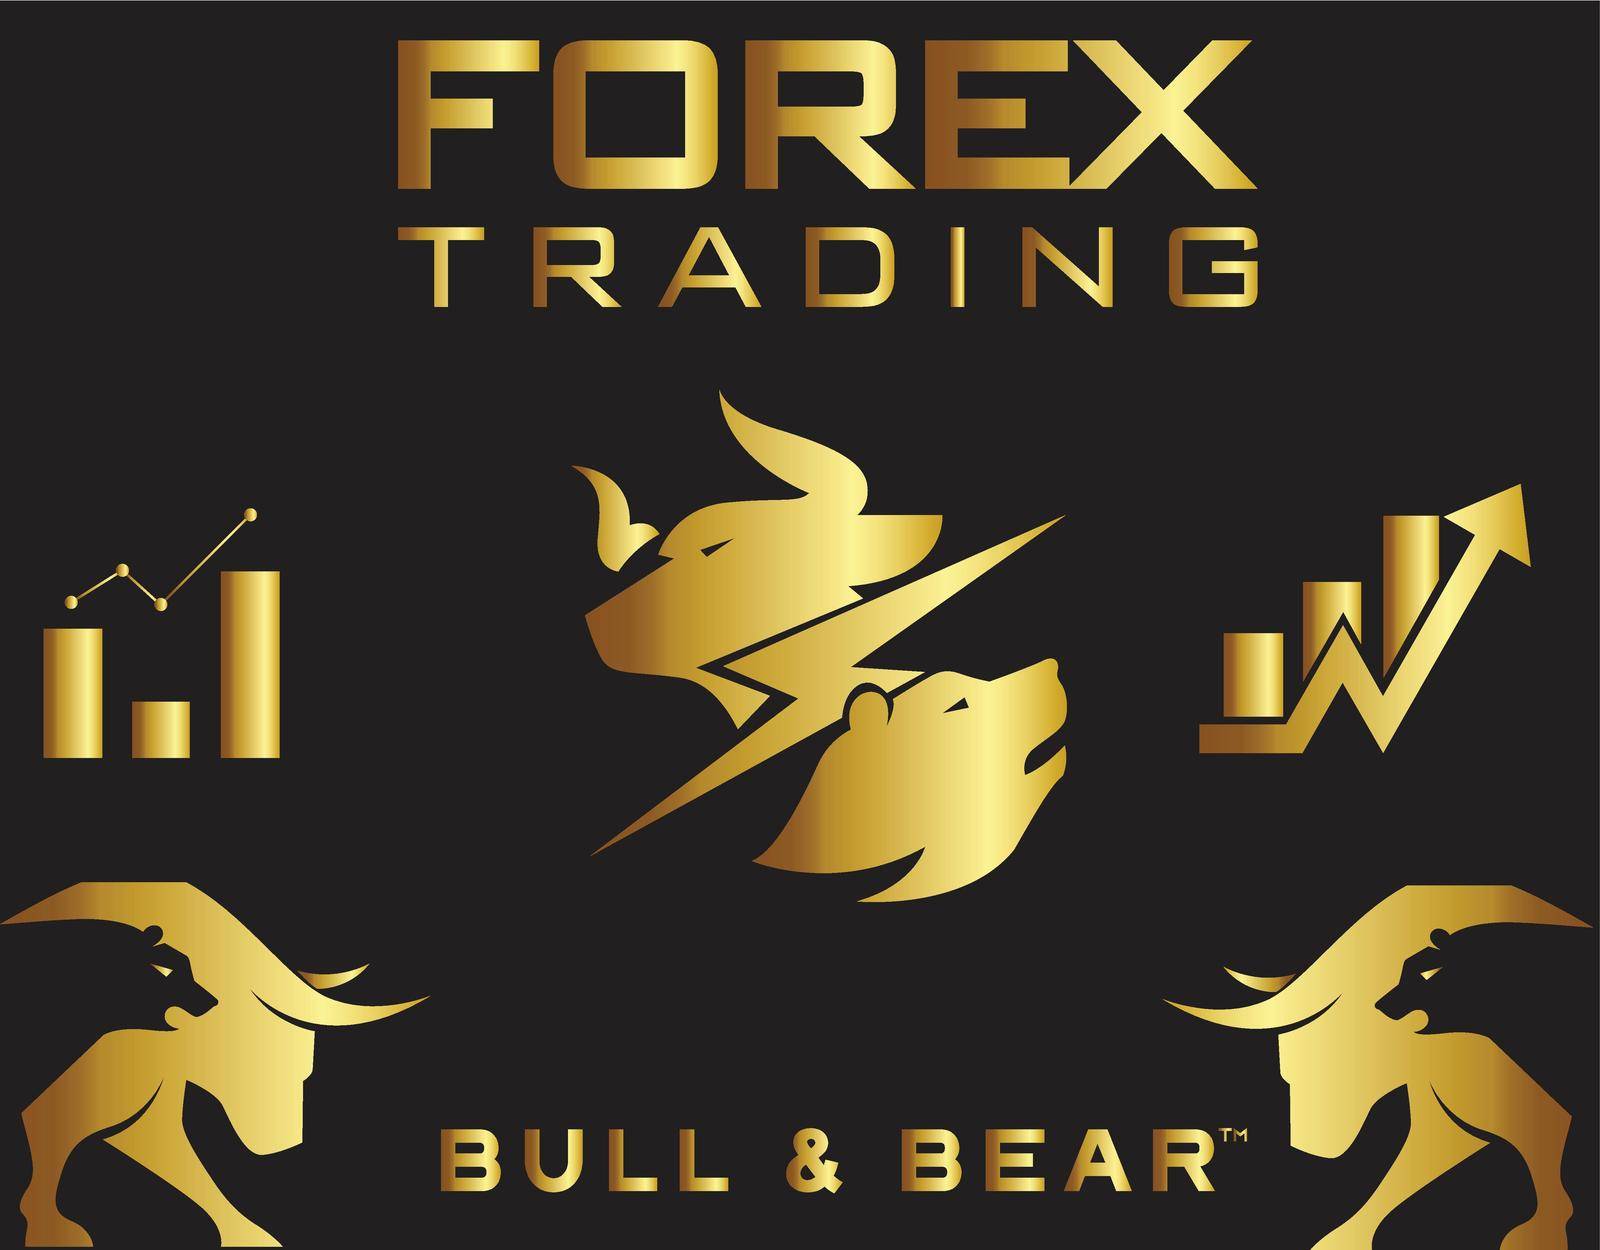 Forex trading Gold Bull And Bear by Vinhsino